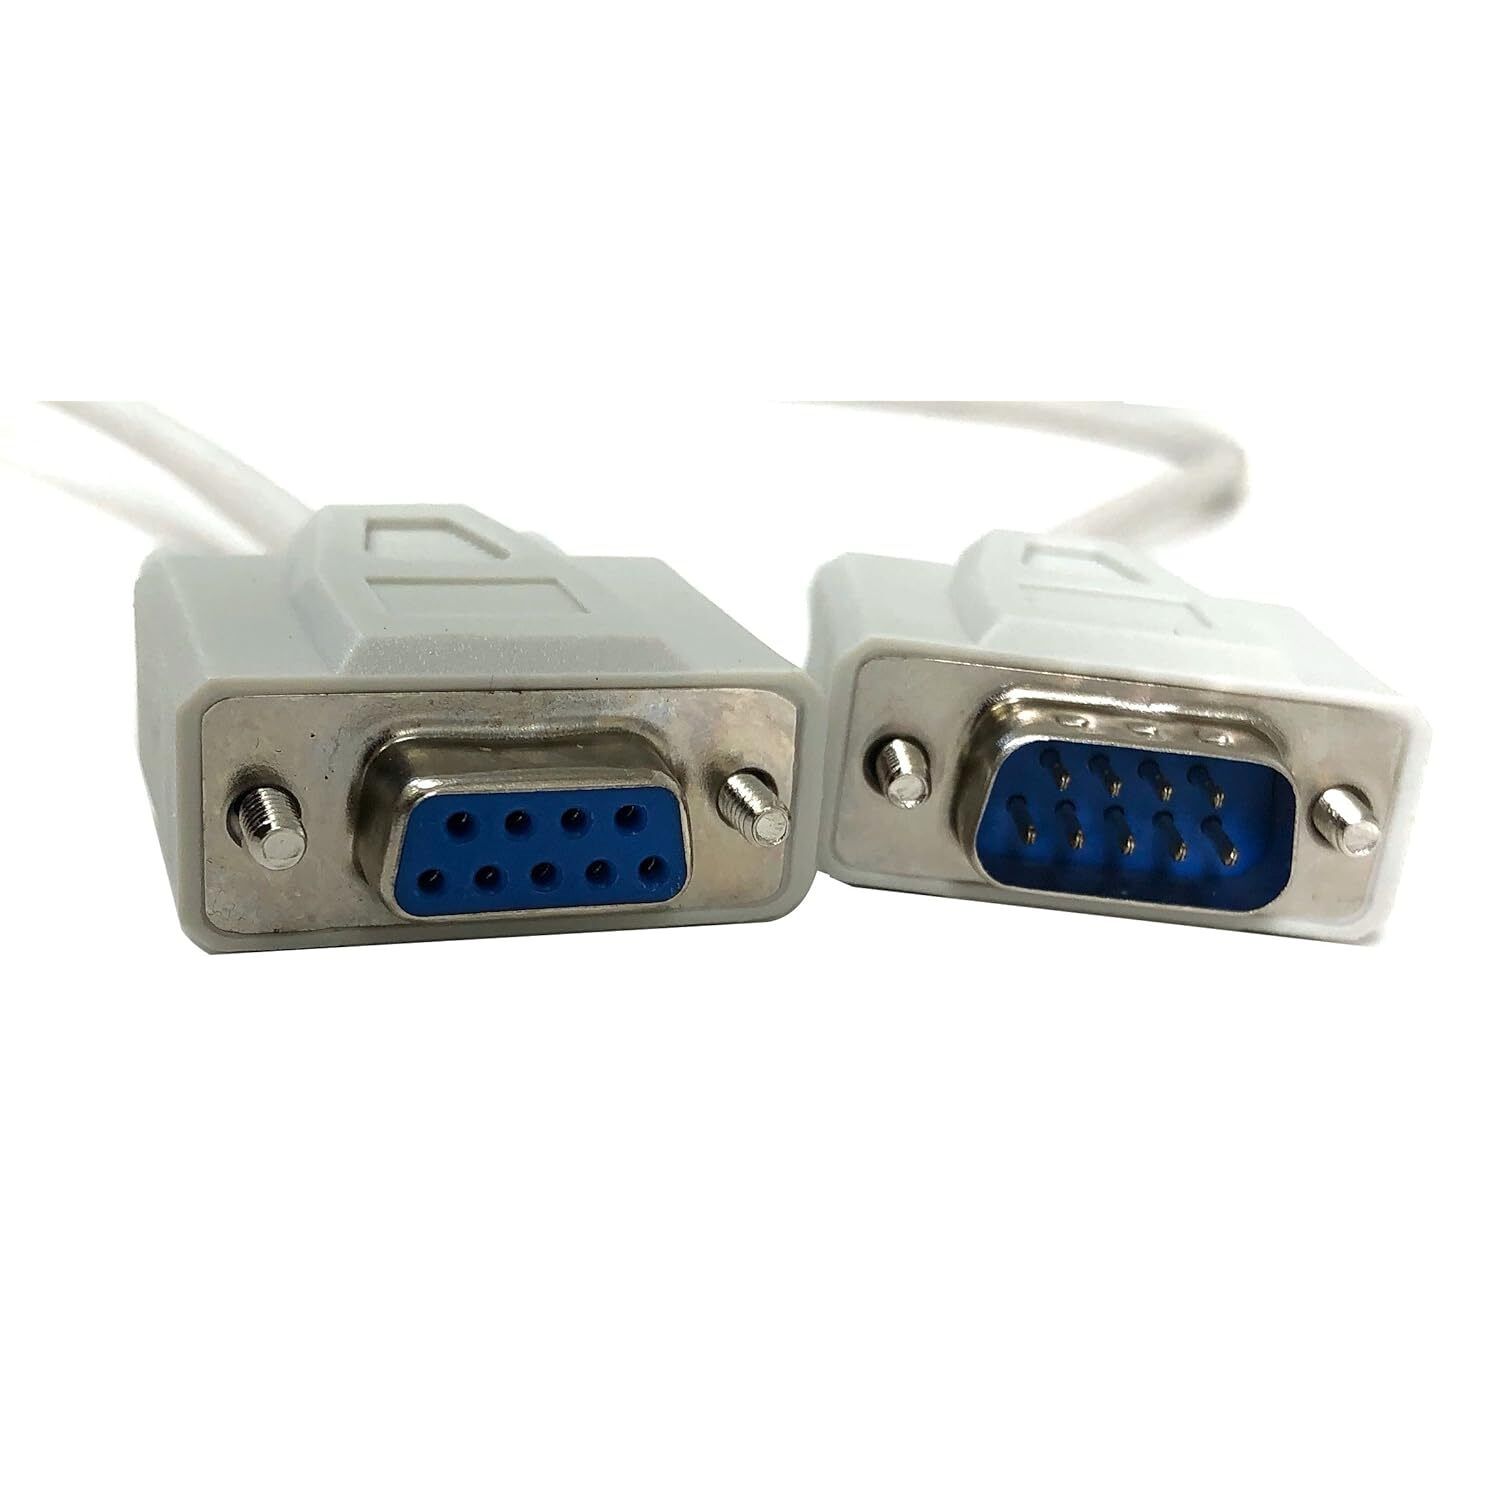 Micro Connectors, Inc. 25 feet DB9 Serial Extension Cable M/F (M05-10325)